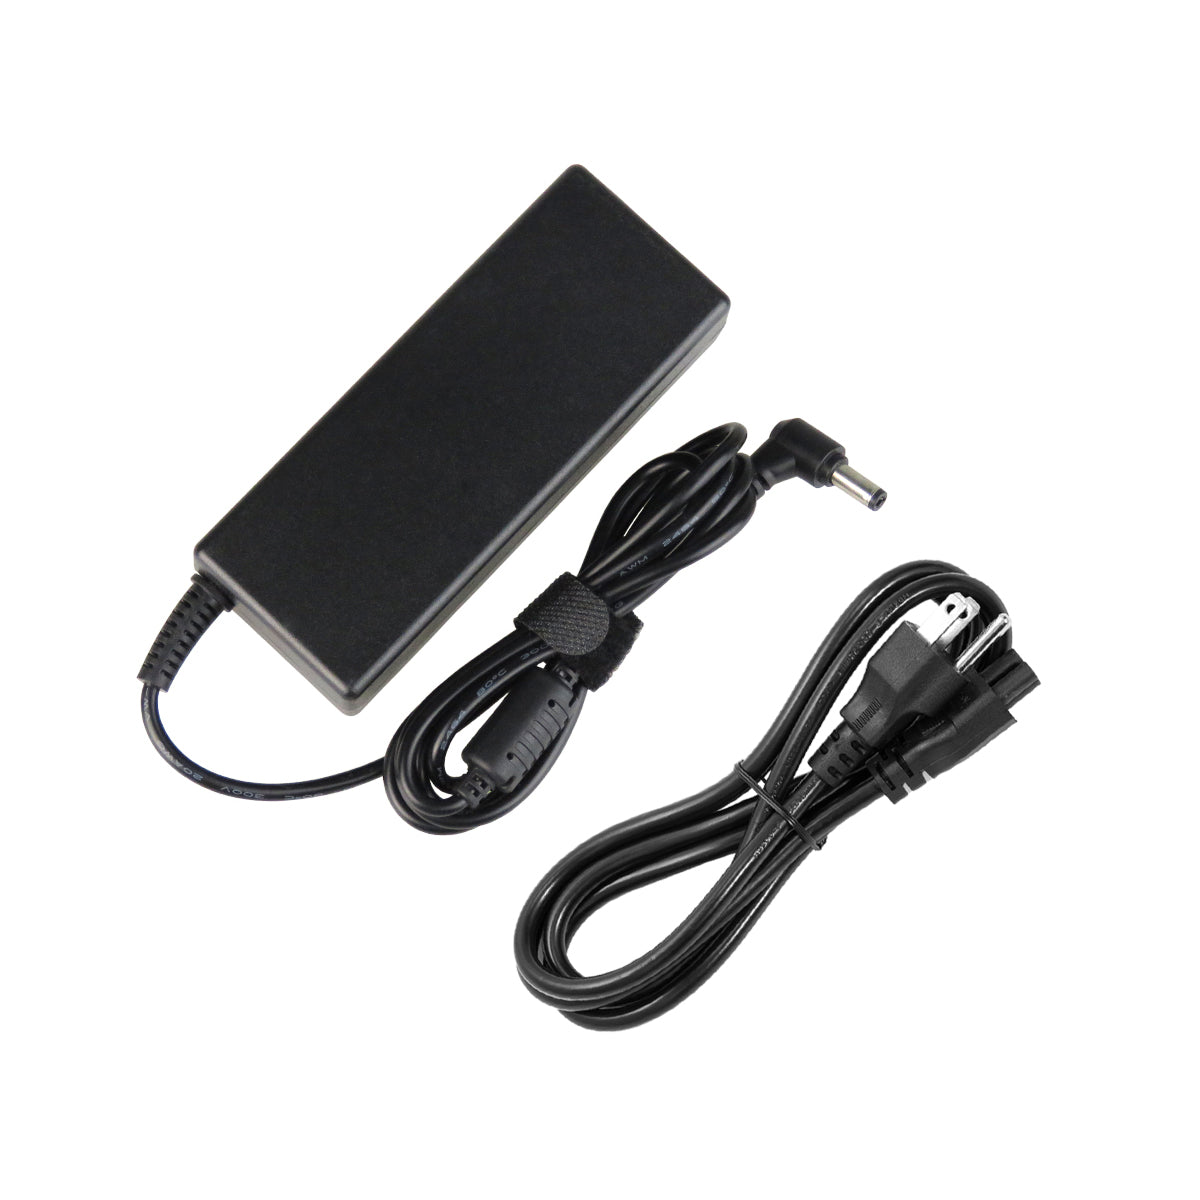 AC Adapter Charger for ASUS B50 Notebook.